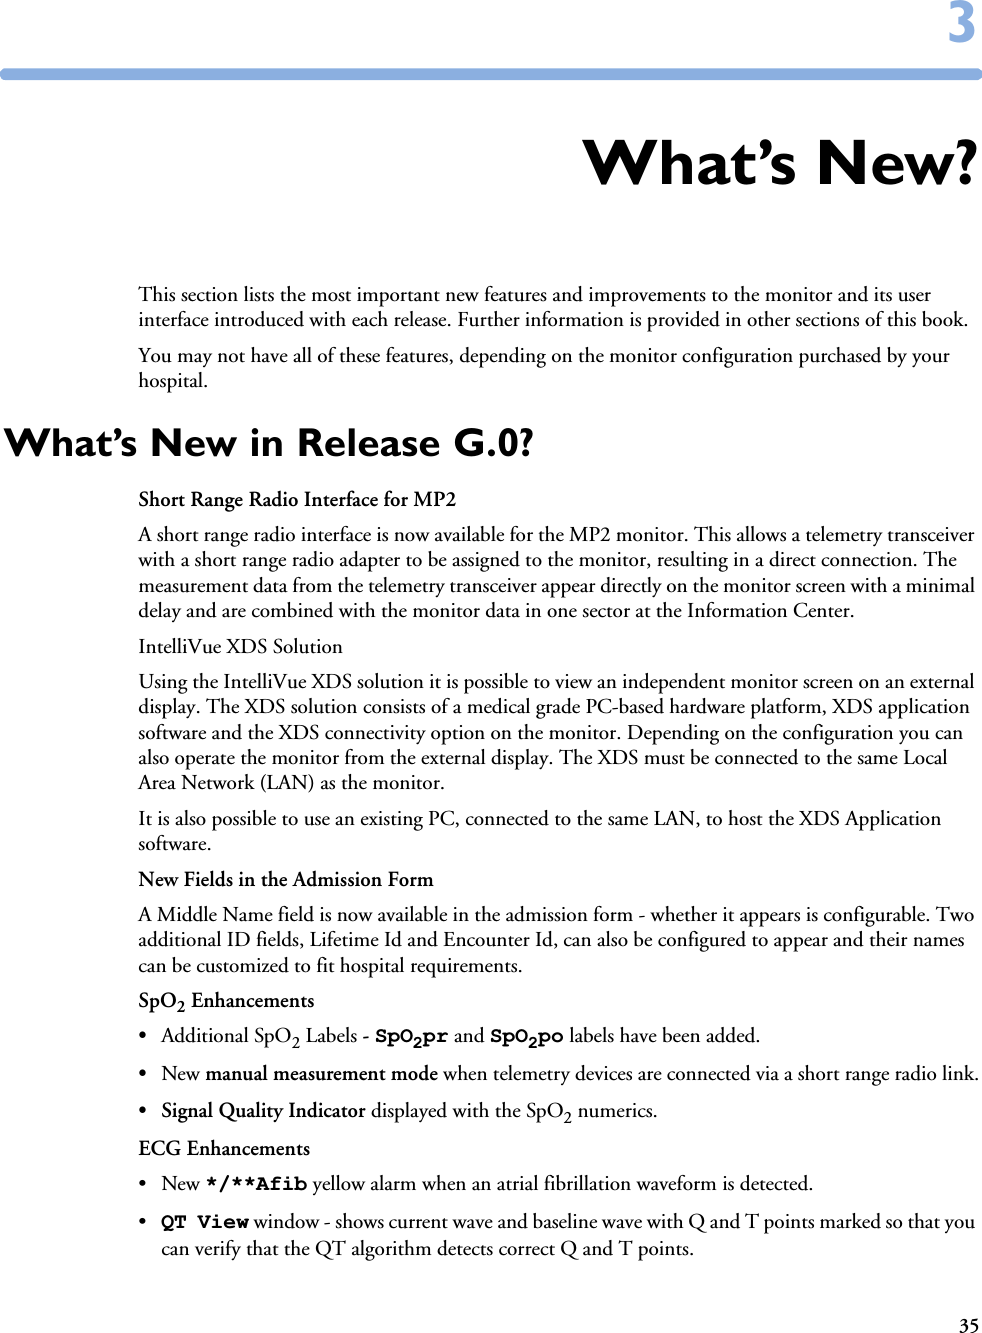 3533What’s New?This section lists the most important new features and improvements to the monitor and its user interface introduced with each release. Further information is provided in other sections of this book. You may not have all of these features, depending on the monitor configuration purchased by your hospital.What’s New in Release G.0?Short Range Radio Interface for MP2 A short range radio interface is now available for the MP2 monitor. This allows a telemetry transceiver with a short range radio adapter to be assigned to the monitor, resulting in a direct connection. The measurement data from the telemetry transceiver appear directly on the monitor screen with a minimal delay and are combined with the monitor data in one sector at the Information Center. IntelliVue XDS SolutionUsing the IntelliVue XDS solution it is possible to view an independent monitor screen on an external display. The XDS solution consists of a medical grade PC-based hardware platform, XDS application software and the XDS connectivity option on the monitor. Depending on the configuration you can also operate the monitor from the external display. The XDS must be connected to the same Local Area Network (LAN) as the monitor. It is also possible to use an existing PC, connected to the same LAN, to host the XDS Application software.New Fields in the Admission FormA Middle Name field is now available in the admission form - whether it appears is configurable. Two additional ID fields, Lifetime Id and Encounter Id, can also be configured to appear and their names can be customized to fit hospital requirements. SpO2 Enhancements•Additional SpO2 Labels - SpO2pr and SpO2po labels have been added.•New manual measurement mode when telemetry devices are connected via a short range radio link.• Signal Quality Indicator displayed with the SpO2 numerics. ECG Enhancements•New */**Afib yellow alarm when an atrial fibrillation waveform is detected.•QT View window - shows current wave and baseline wave with Q and T points marked so that you can verify that the QT algorithm detects correct Q and T points.